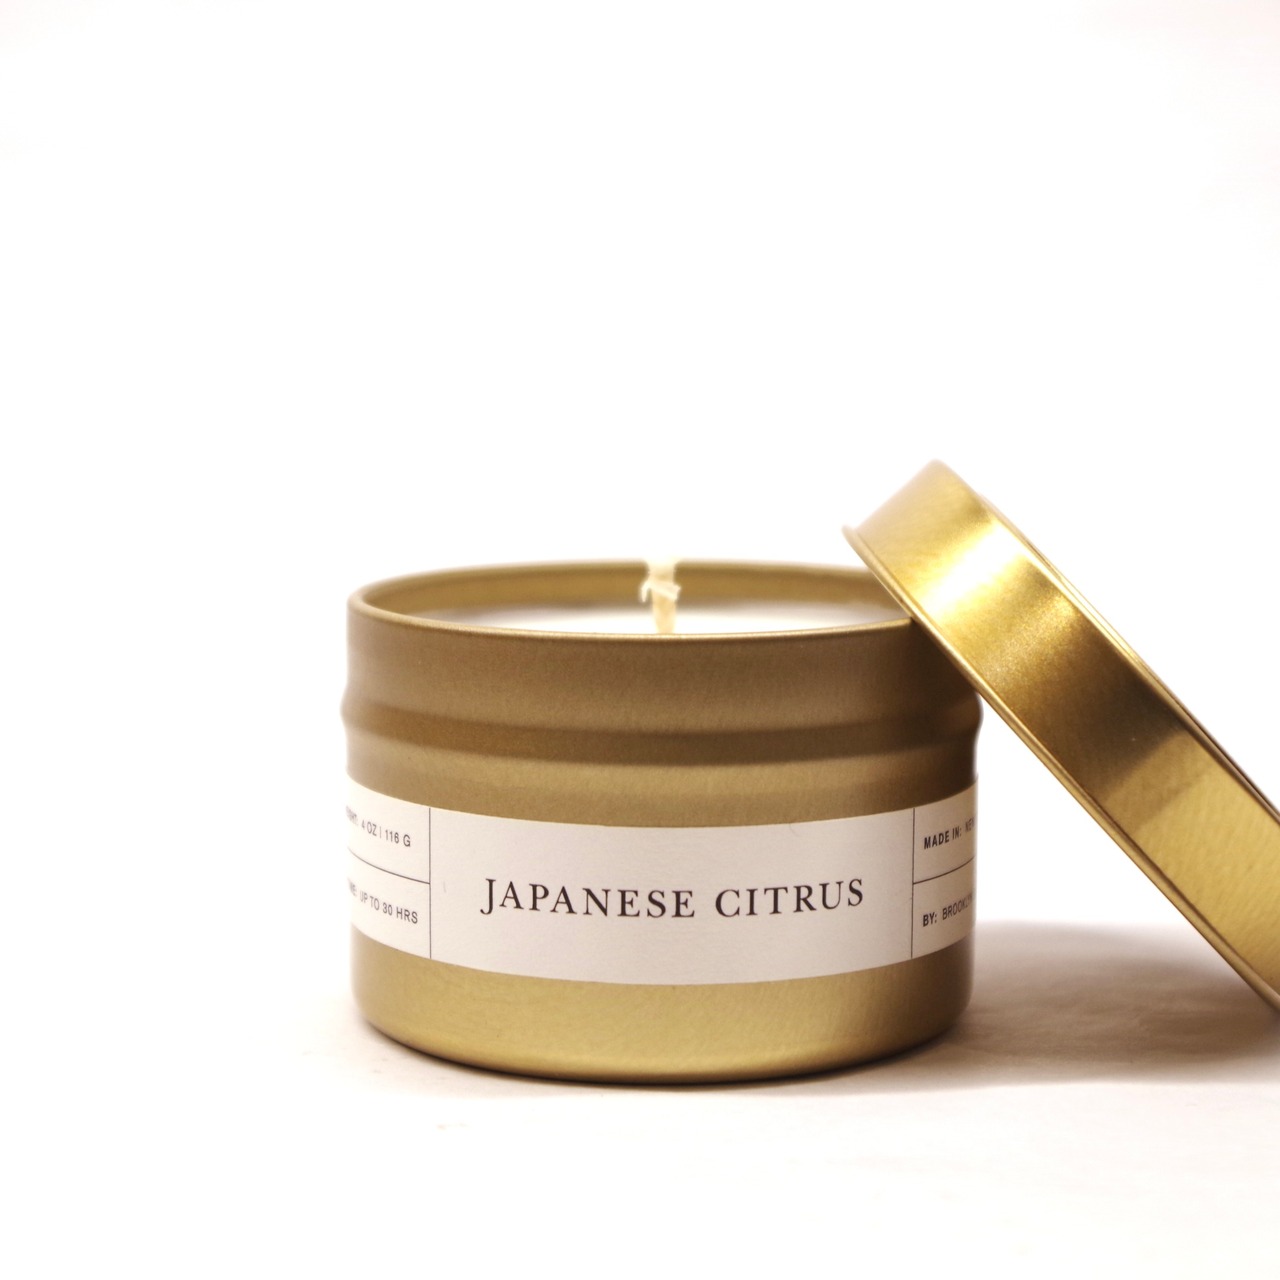 Brooklyn Candle Studio　GOLD TRAVEL CANDLE 再入荷